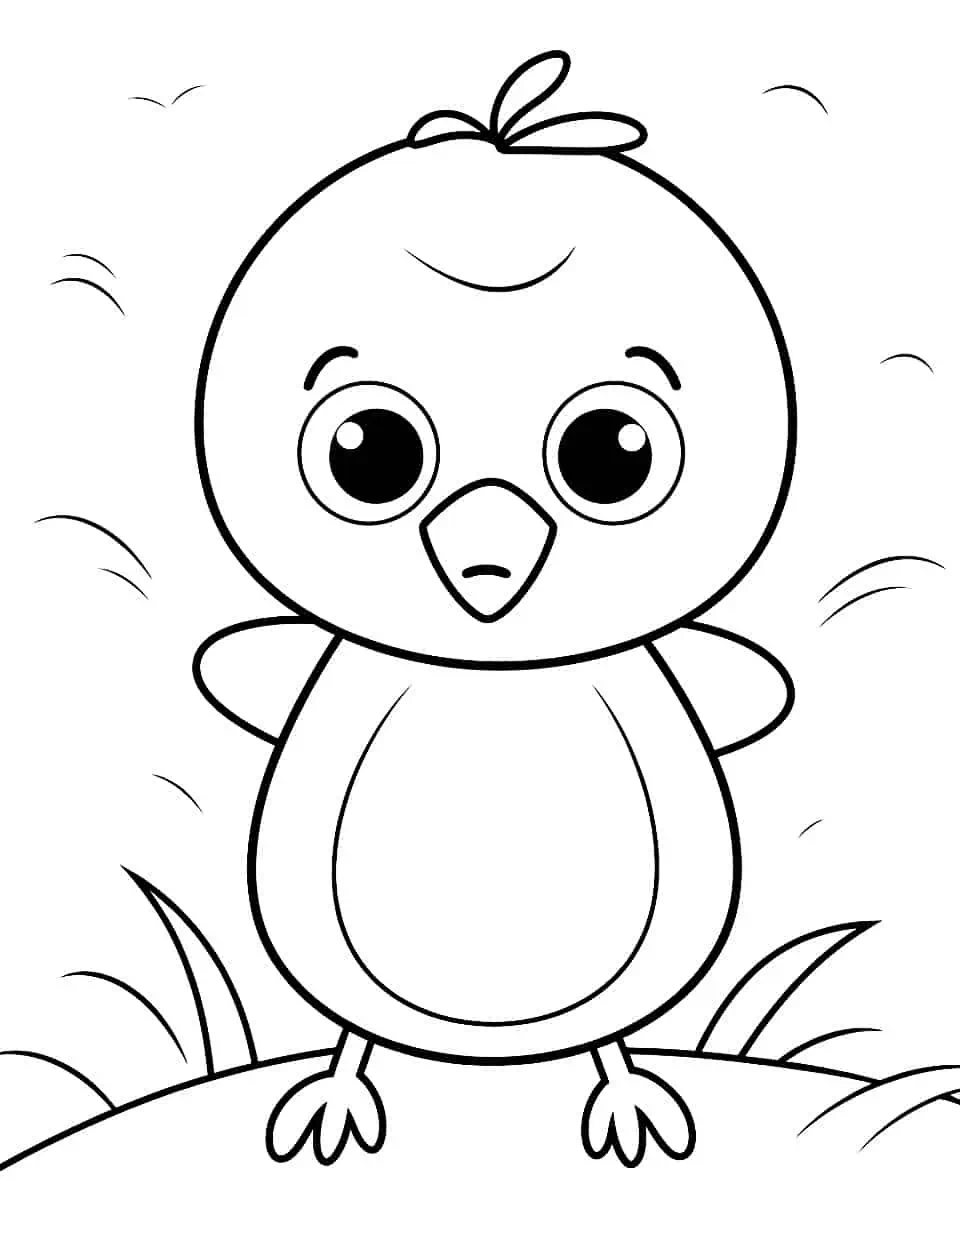 Cute Spring Chick Coloring Page - A simple and cute coloring sheet featuring a hatching chick, perfect for toddlers and preschoolers.